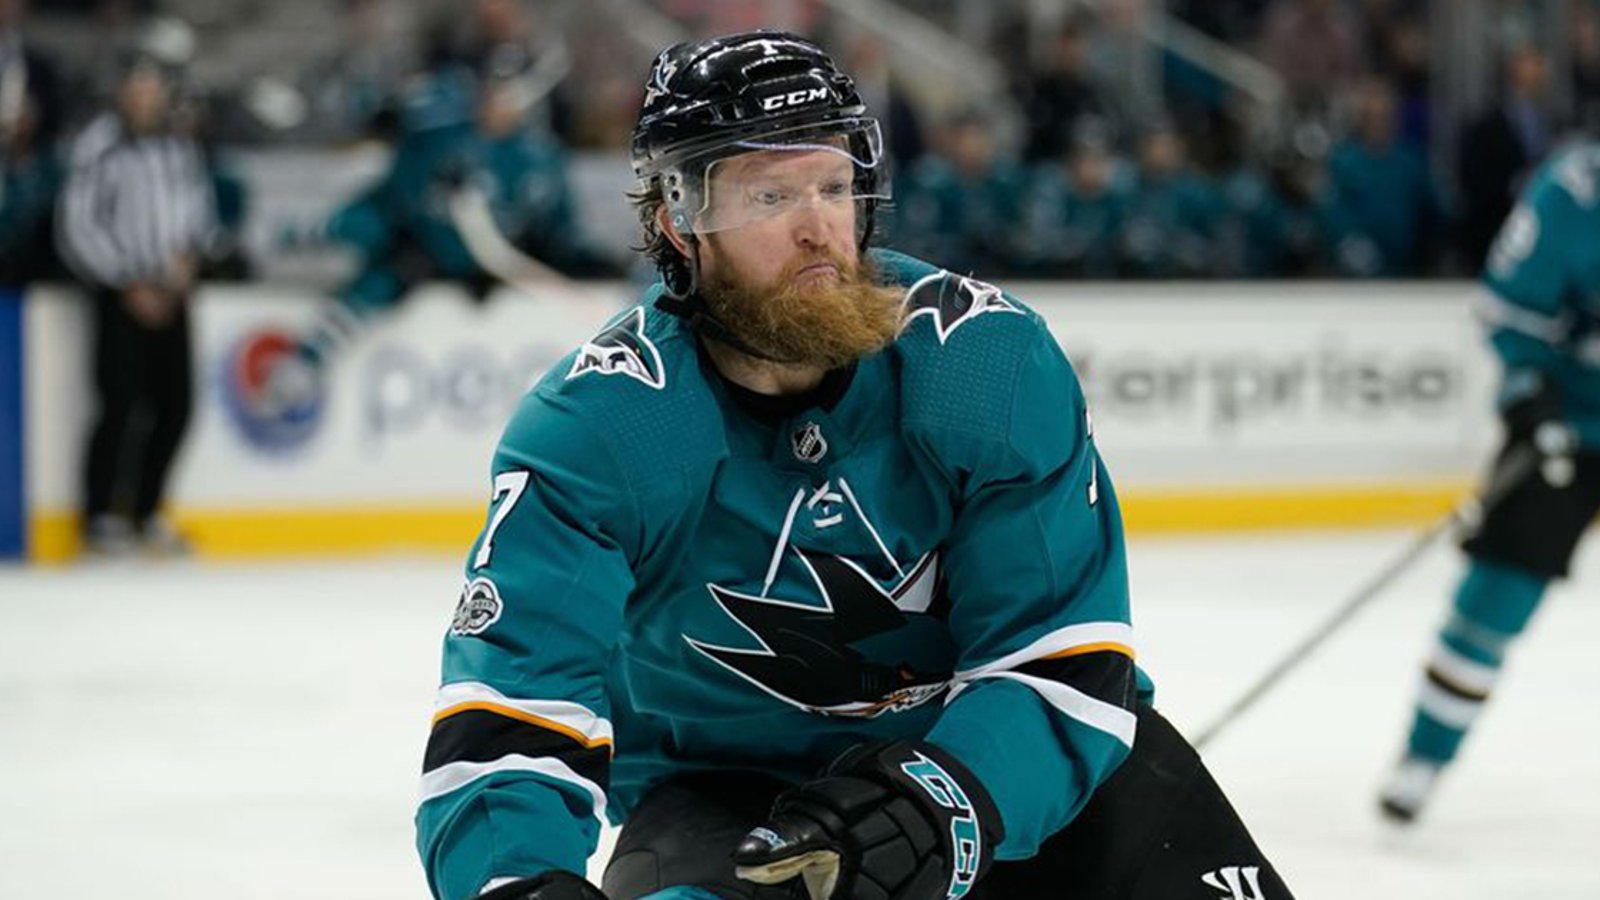 Breaking: Sharks assign Martin to AHL